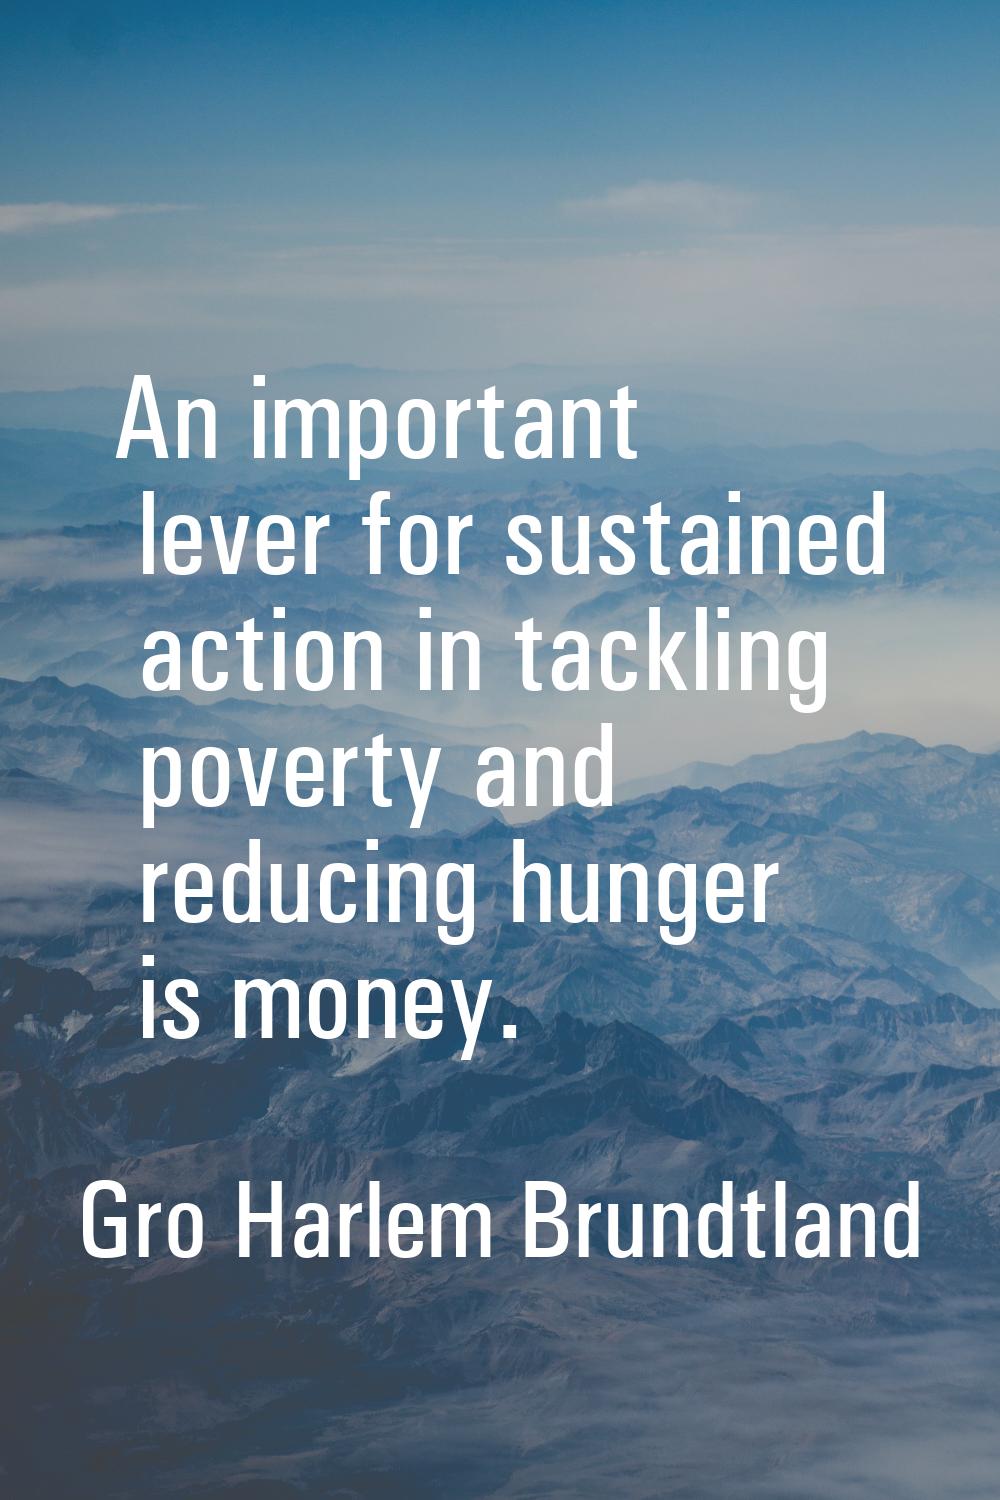 An important lever for sustained action in tackling poverty and reducing hunger is money.